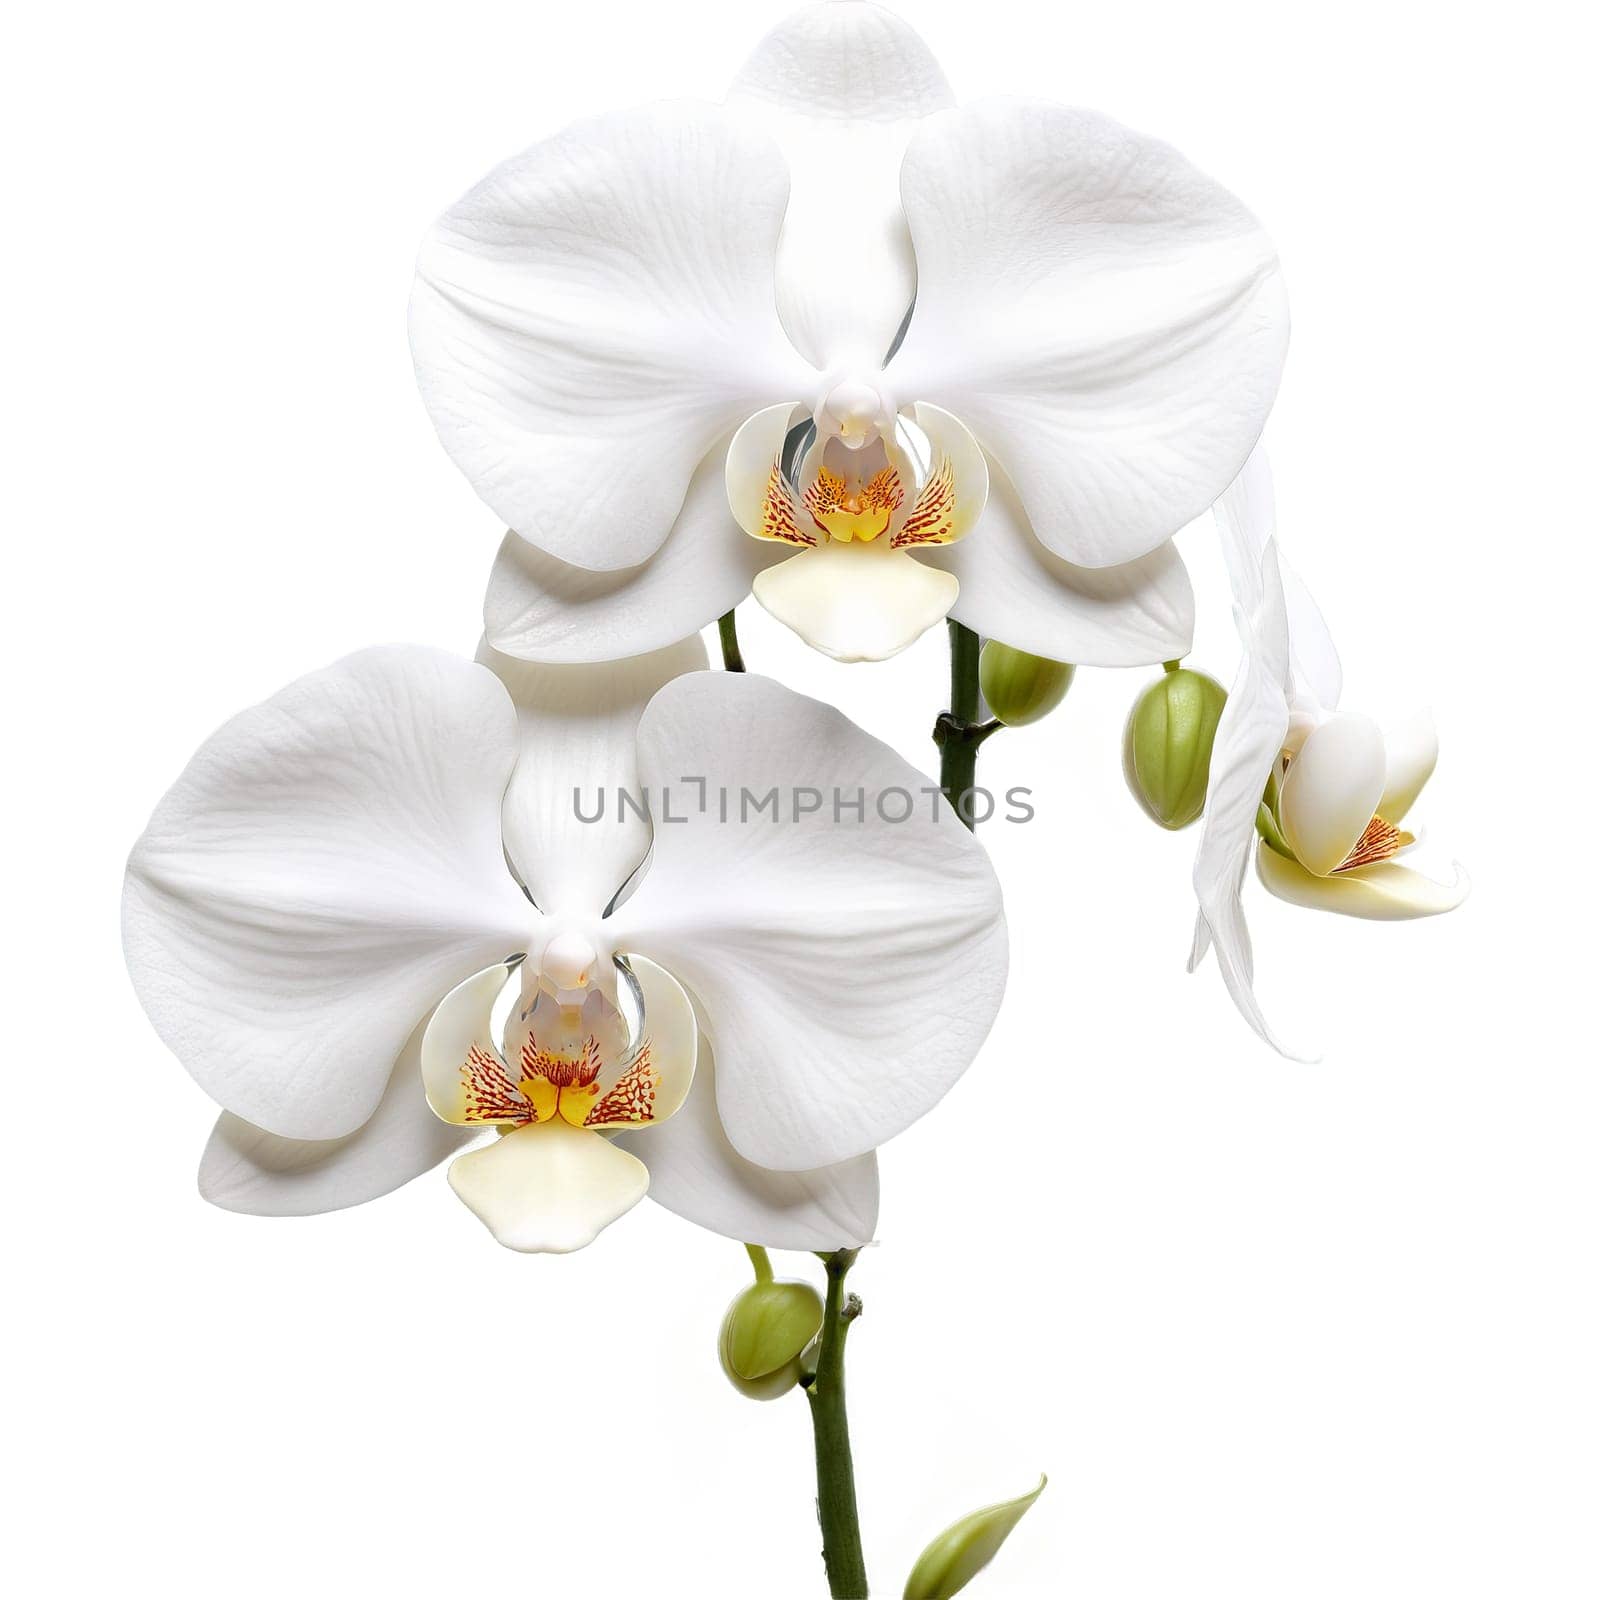 White orchid delicate petals with ruffled edges central lip with intricate patterns Phalaenopsis amabilis by Matiunina